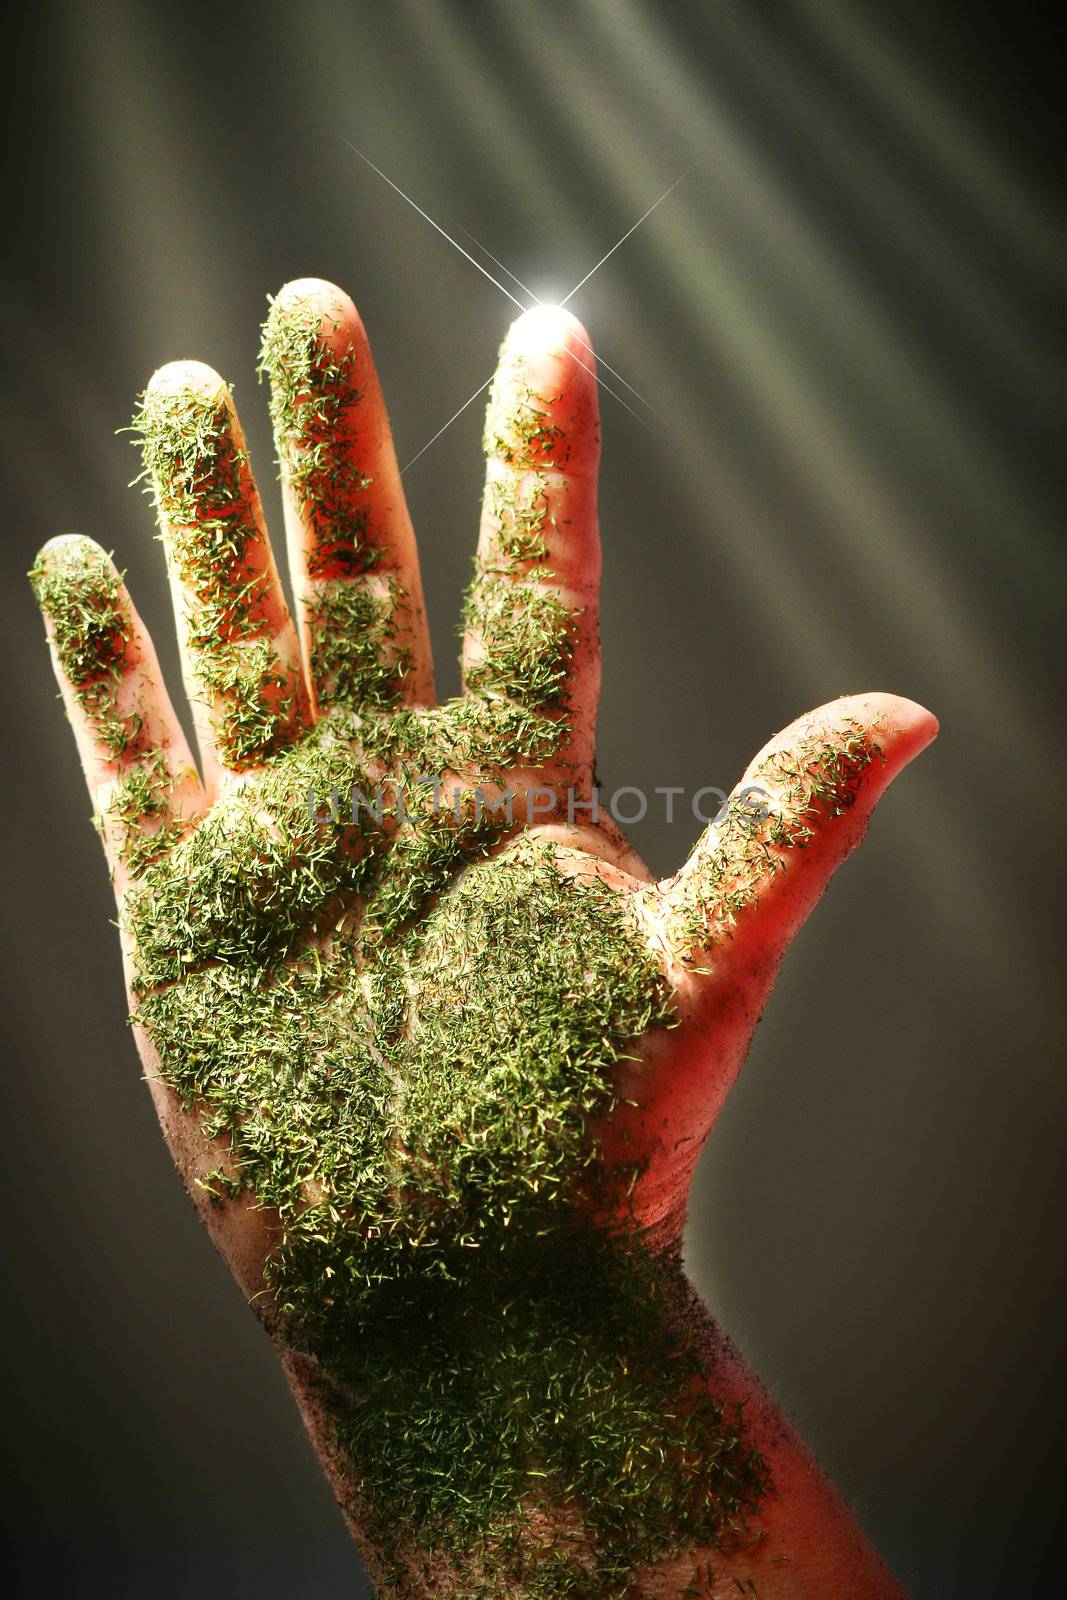 Open hand with green substance, close-up by Sandralise